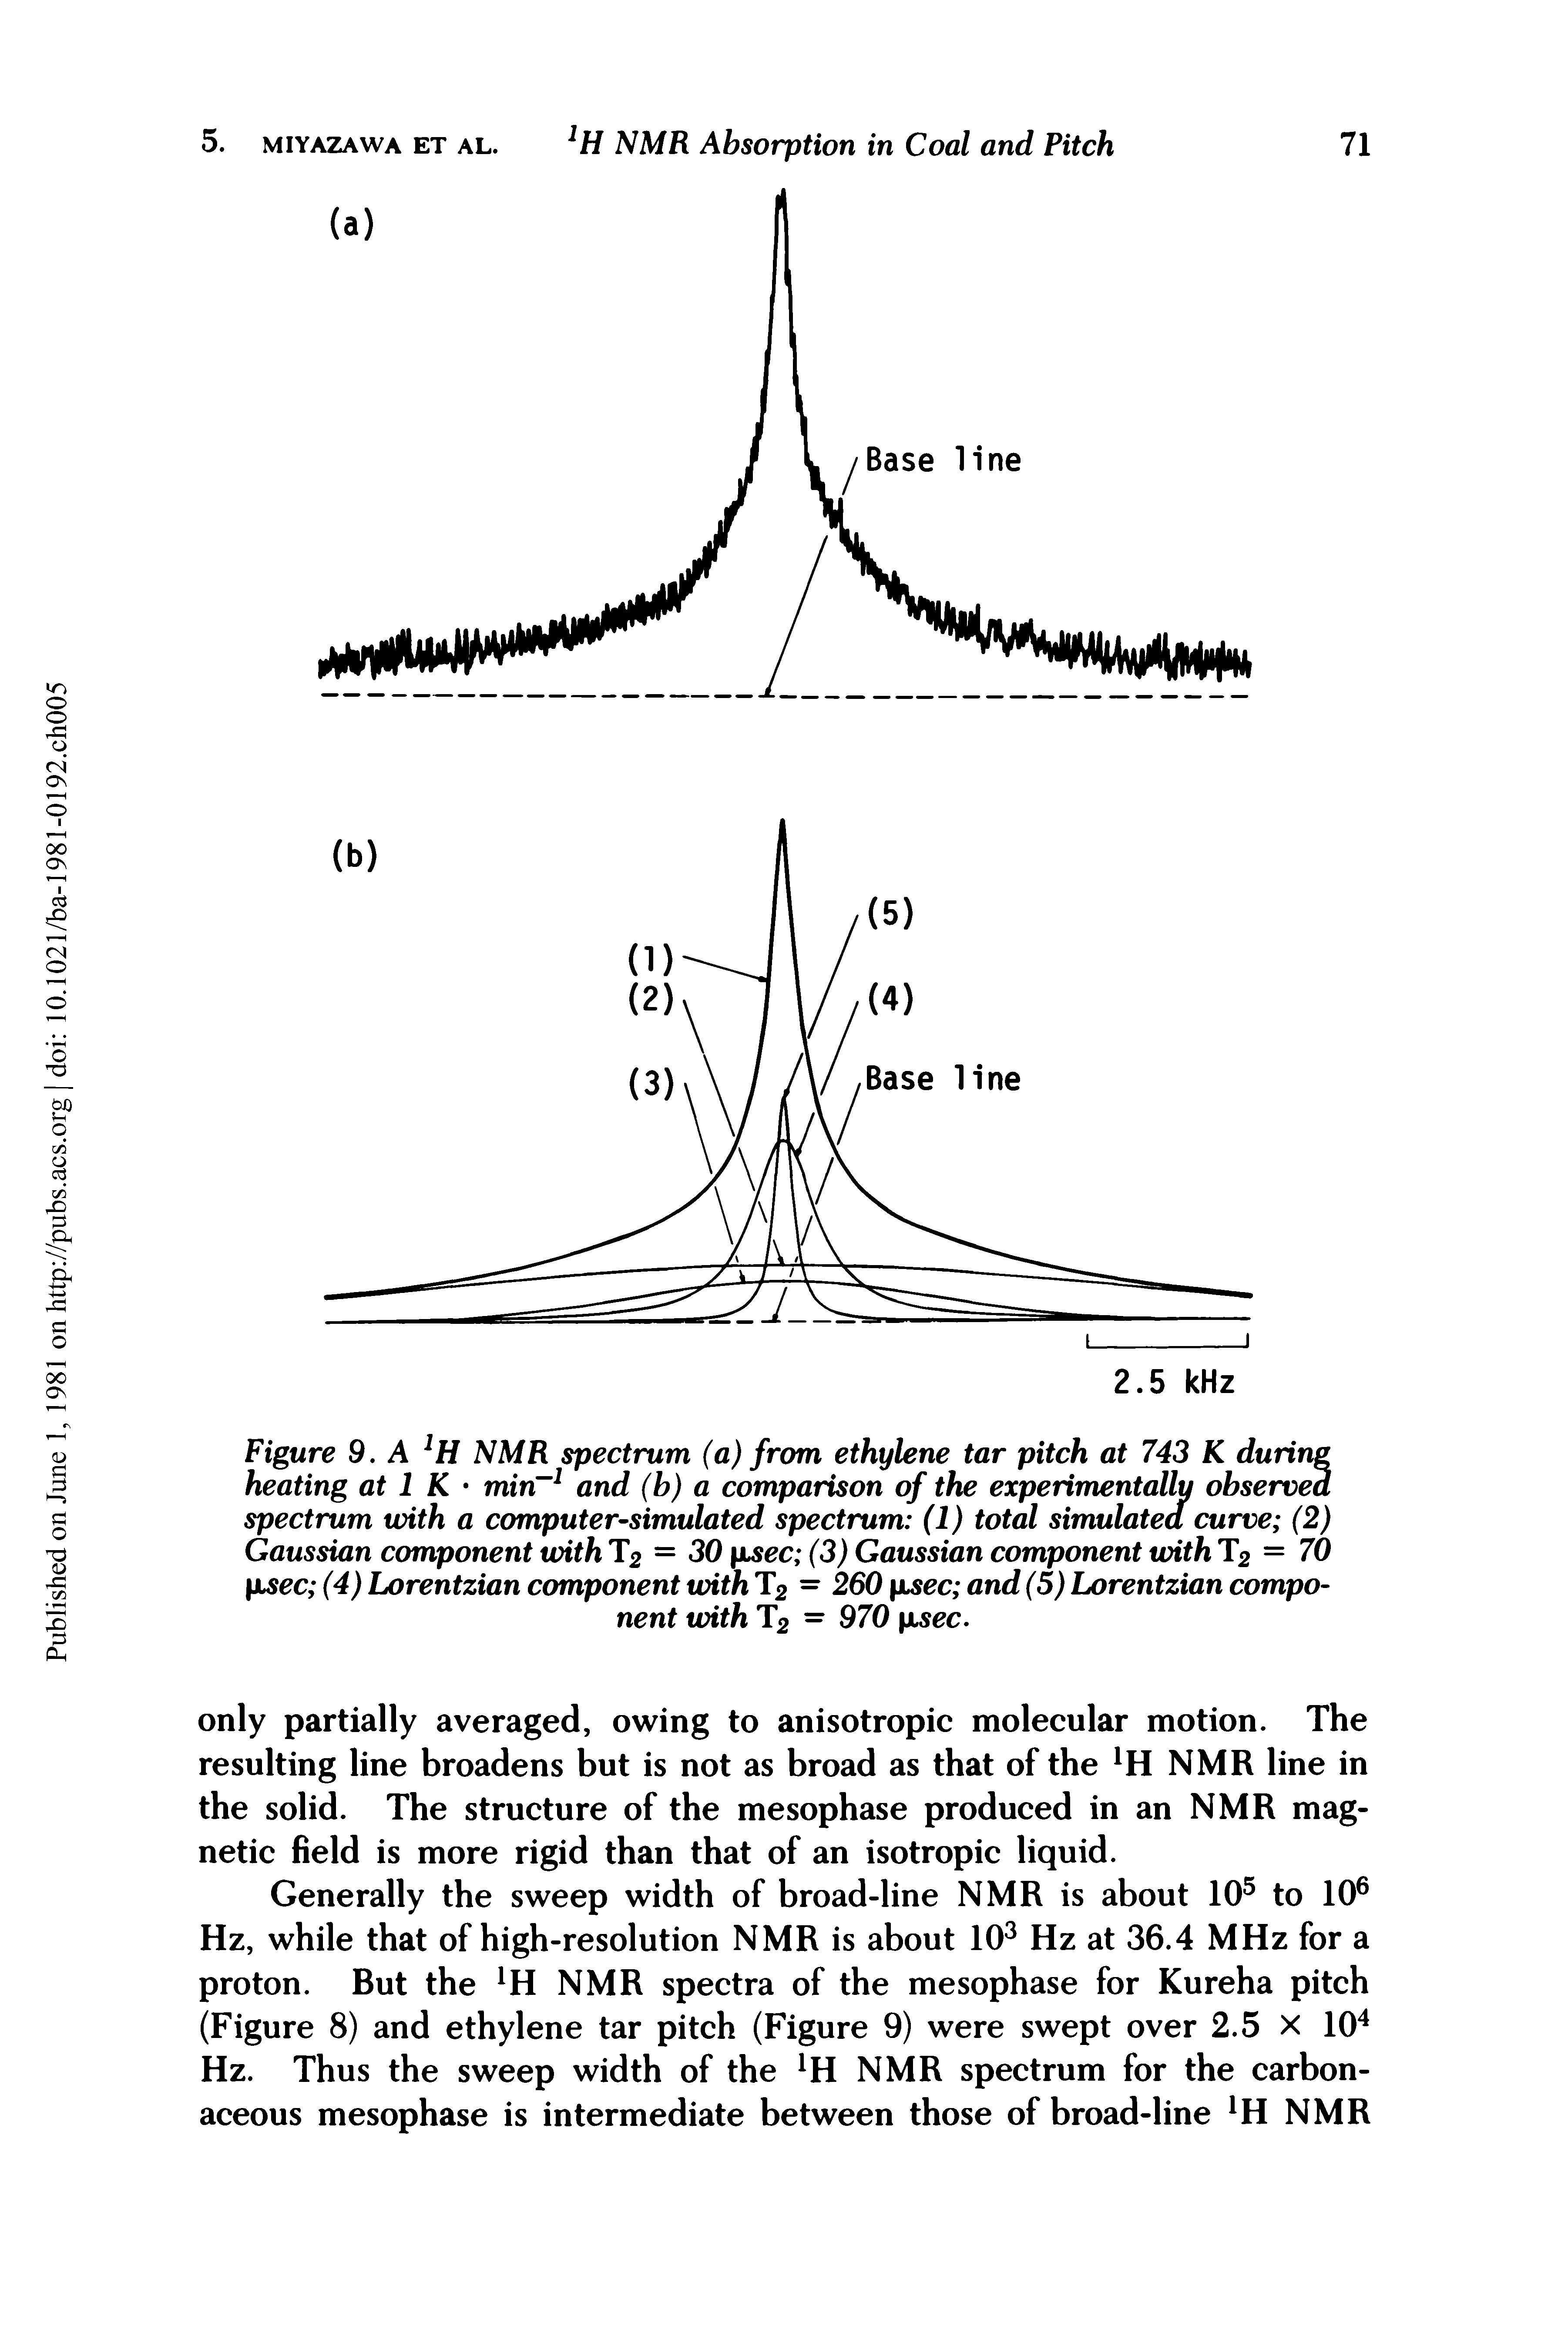 Figure 9. A NMR spectrum (a) from ethylene tar pitch at 743 K during heating at 1 K min and (h) a comparison of the experimentally observed spectrum with a computer-simulated spectrum (1) total simulated curve (2) Gaussian component with T2 = 30 Lsec (3) Gaussian component with T2 = 70 p ec (4) Lorentzian component with T2 = 260 pLsec and (5) Lorentzian component with T2 = 970 pisec.